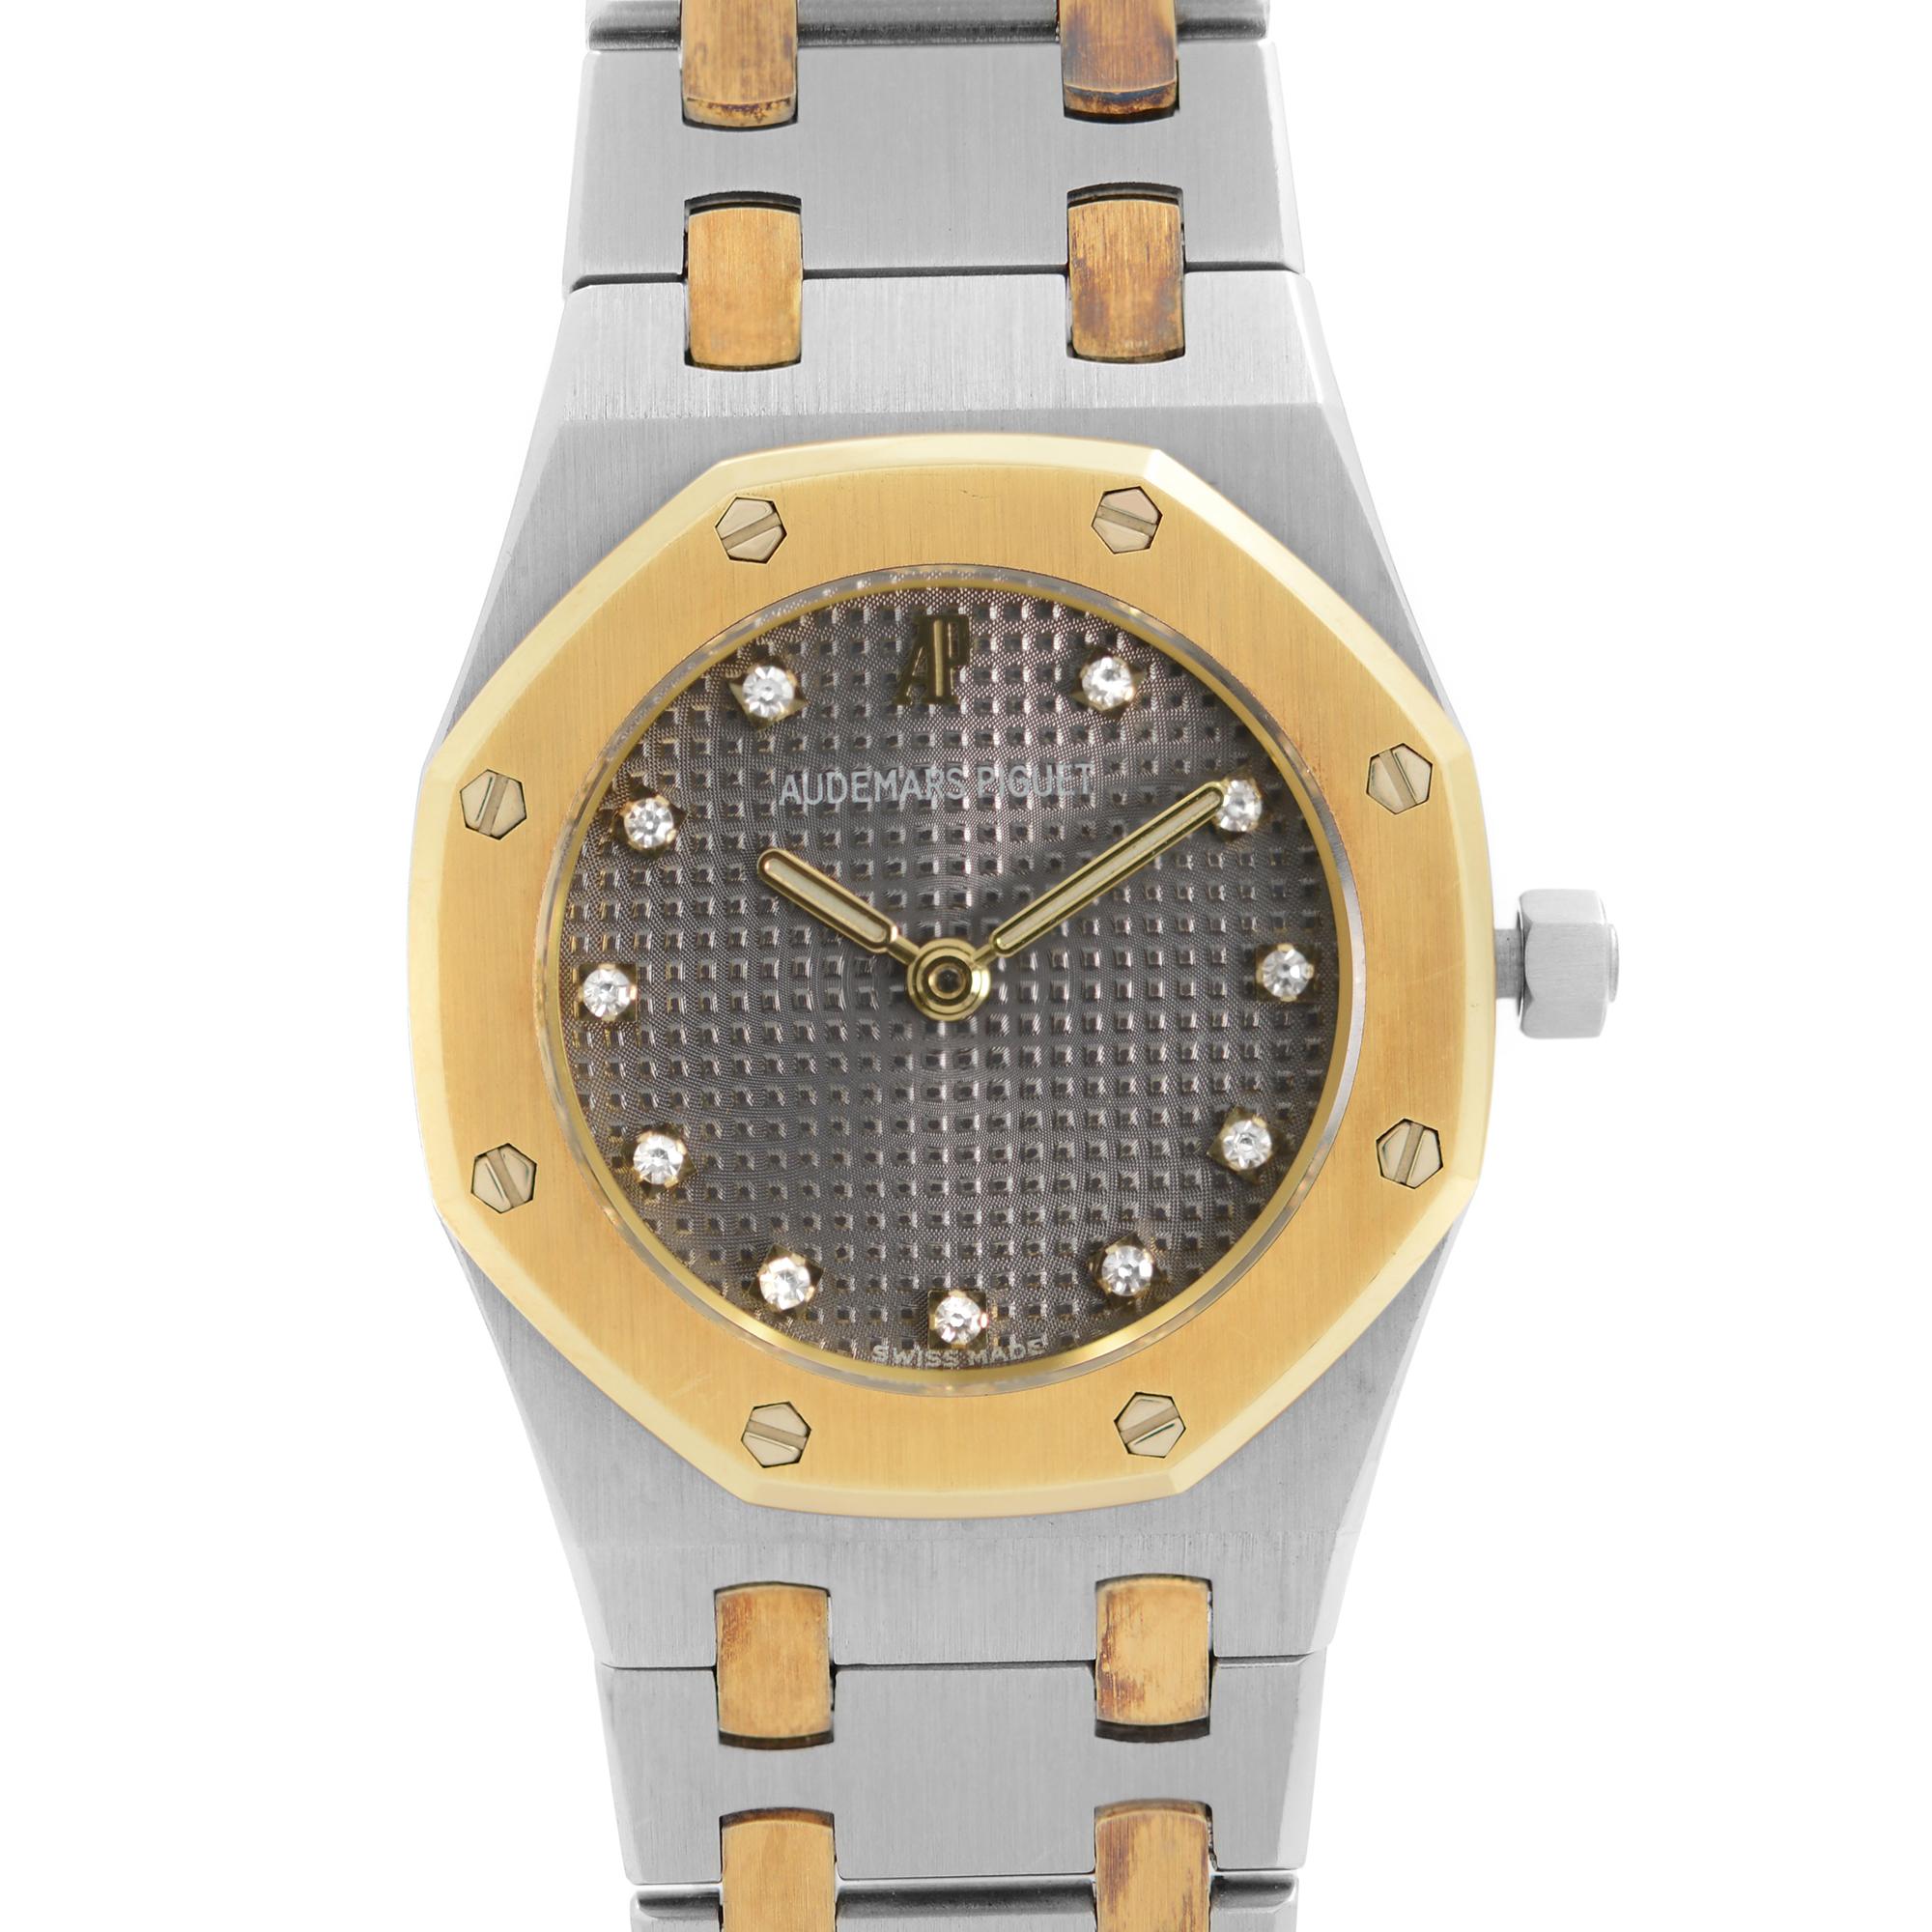 Pre Owned Audemars Piguet Royal Oak 25mm 18K Rose Gold Steel Quartz Ladies Watch SA 66270. Factory Set rare Diamond dial. This Beautiful Timepiece is Powered by Quartz (Battery) Movement And Features: Brushed Octagon Stainless Steel and Yellow Gold